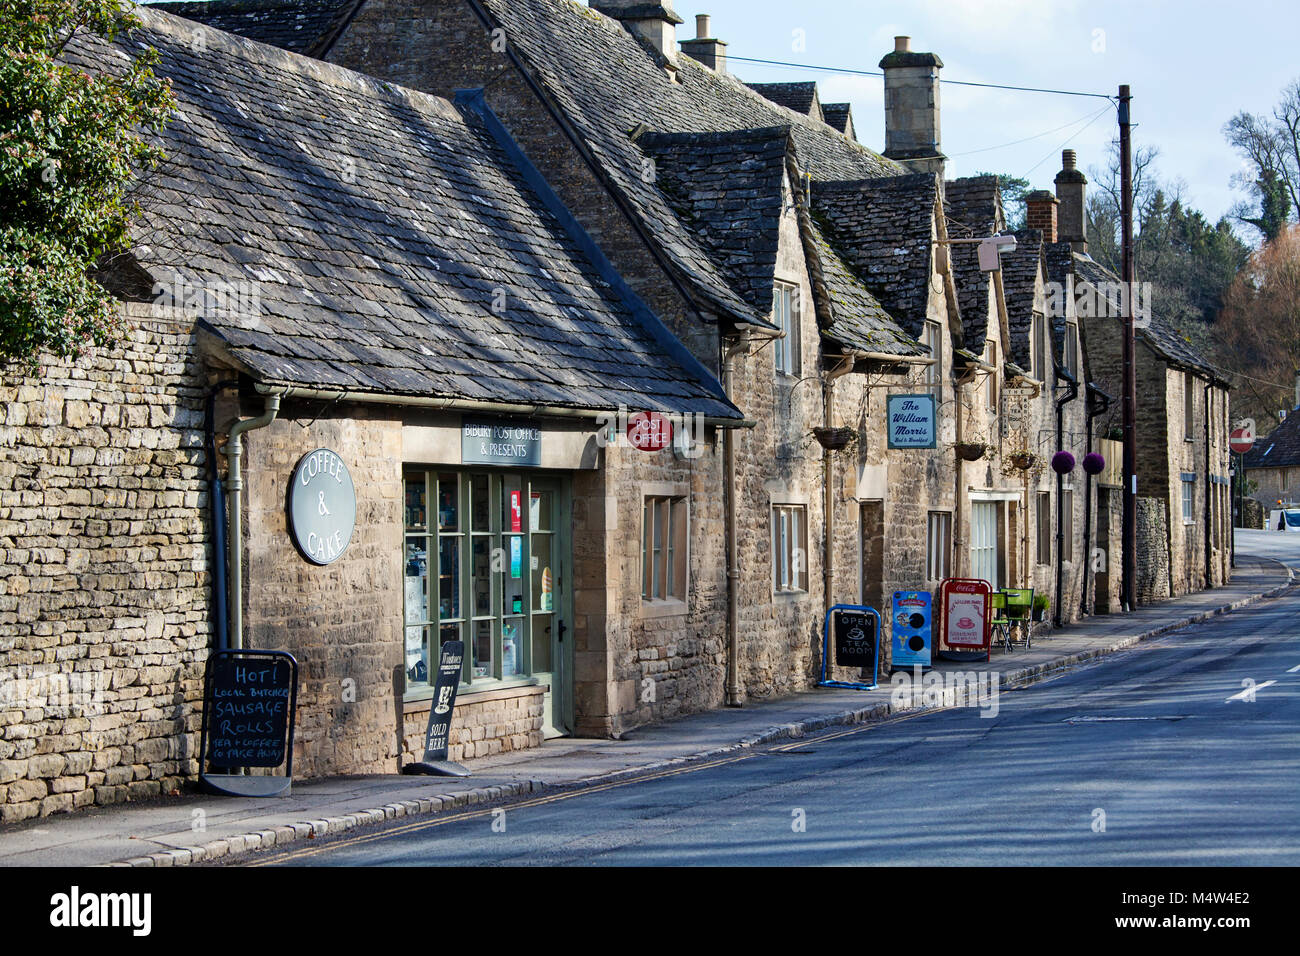 BIBURY, UK - FEBRUARY 15th, 2018: Old cottages in Bibury: Bibury is a typical Costwold village with traditional english architecture. Stock Photo